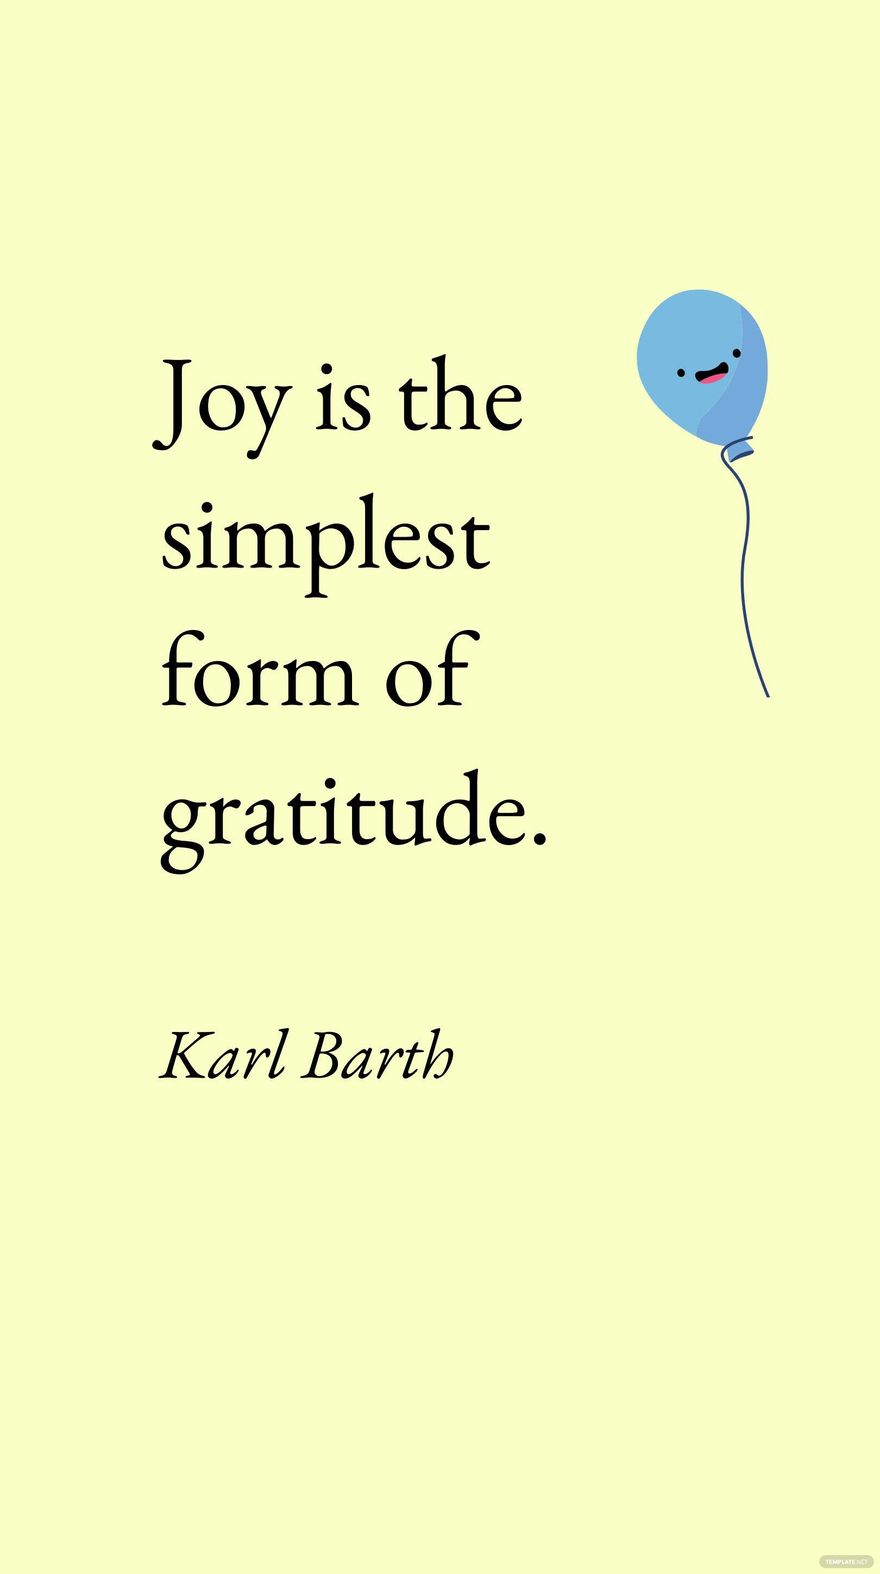 Free Karl Barth - Joy is the simplest form of gratitude.  in JPG